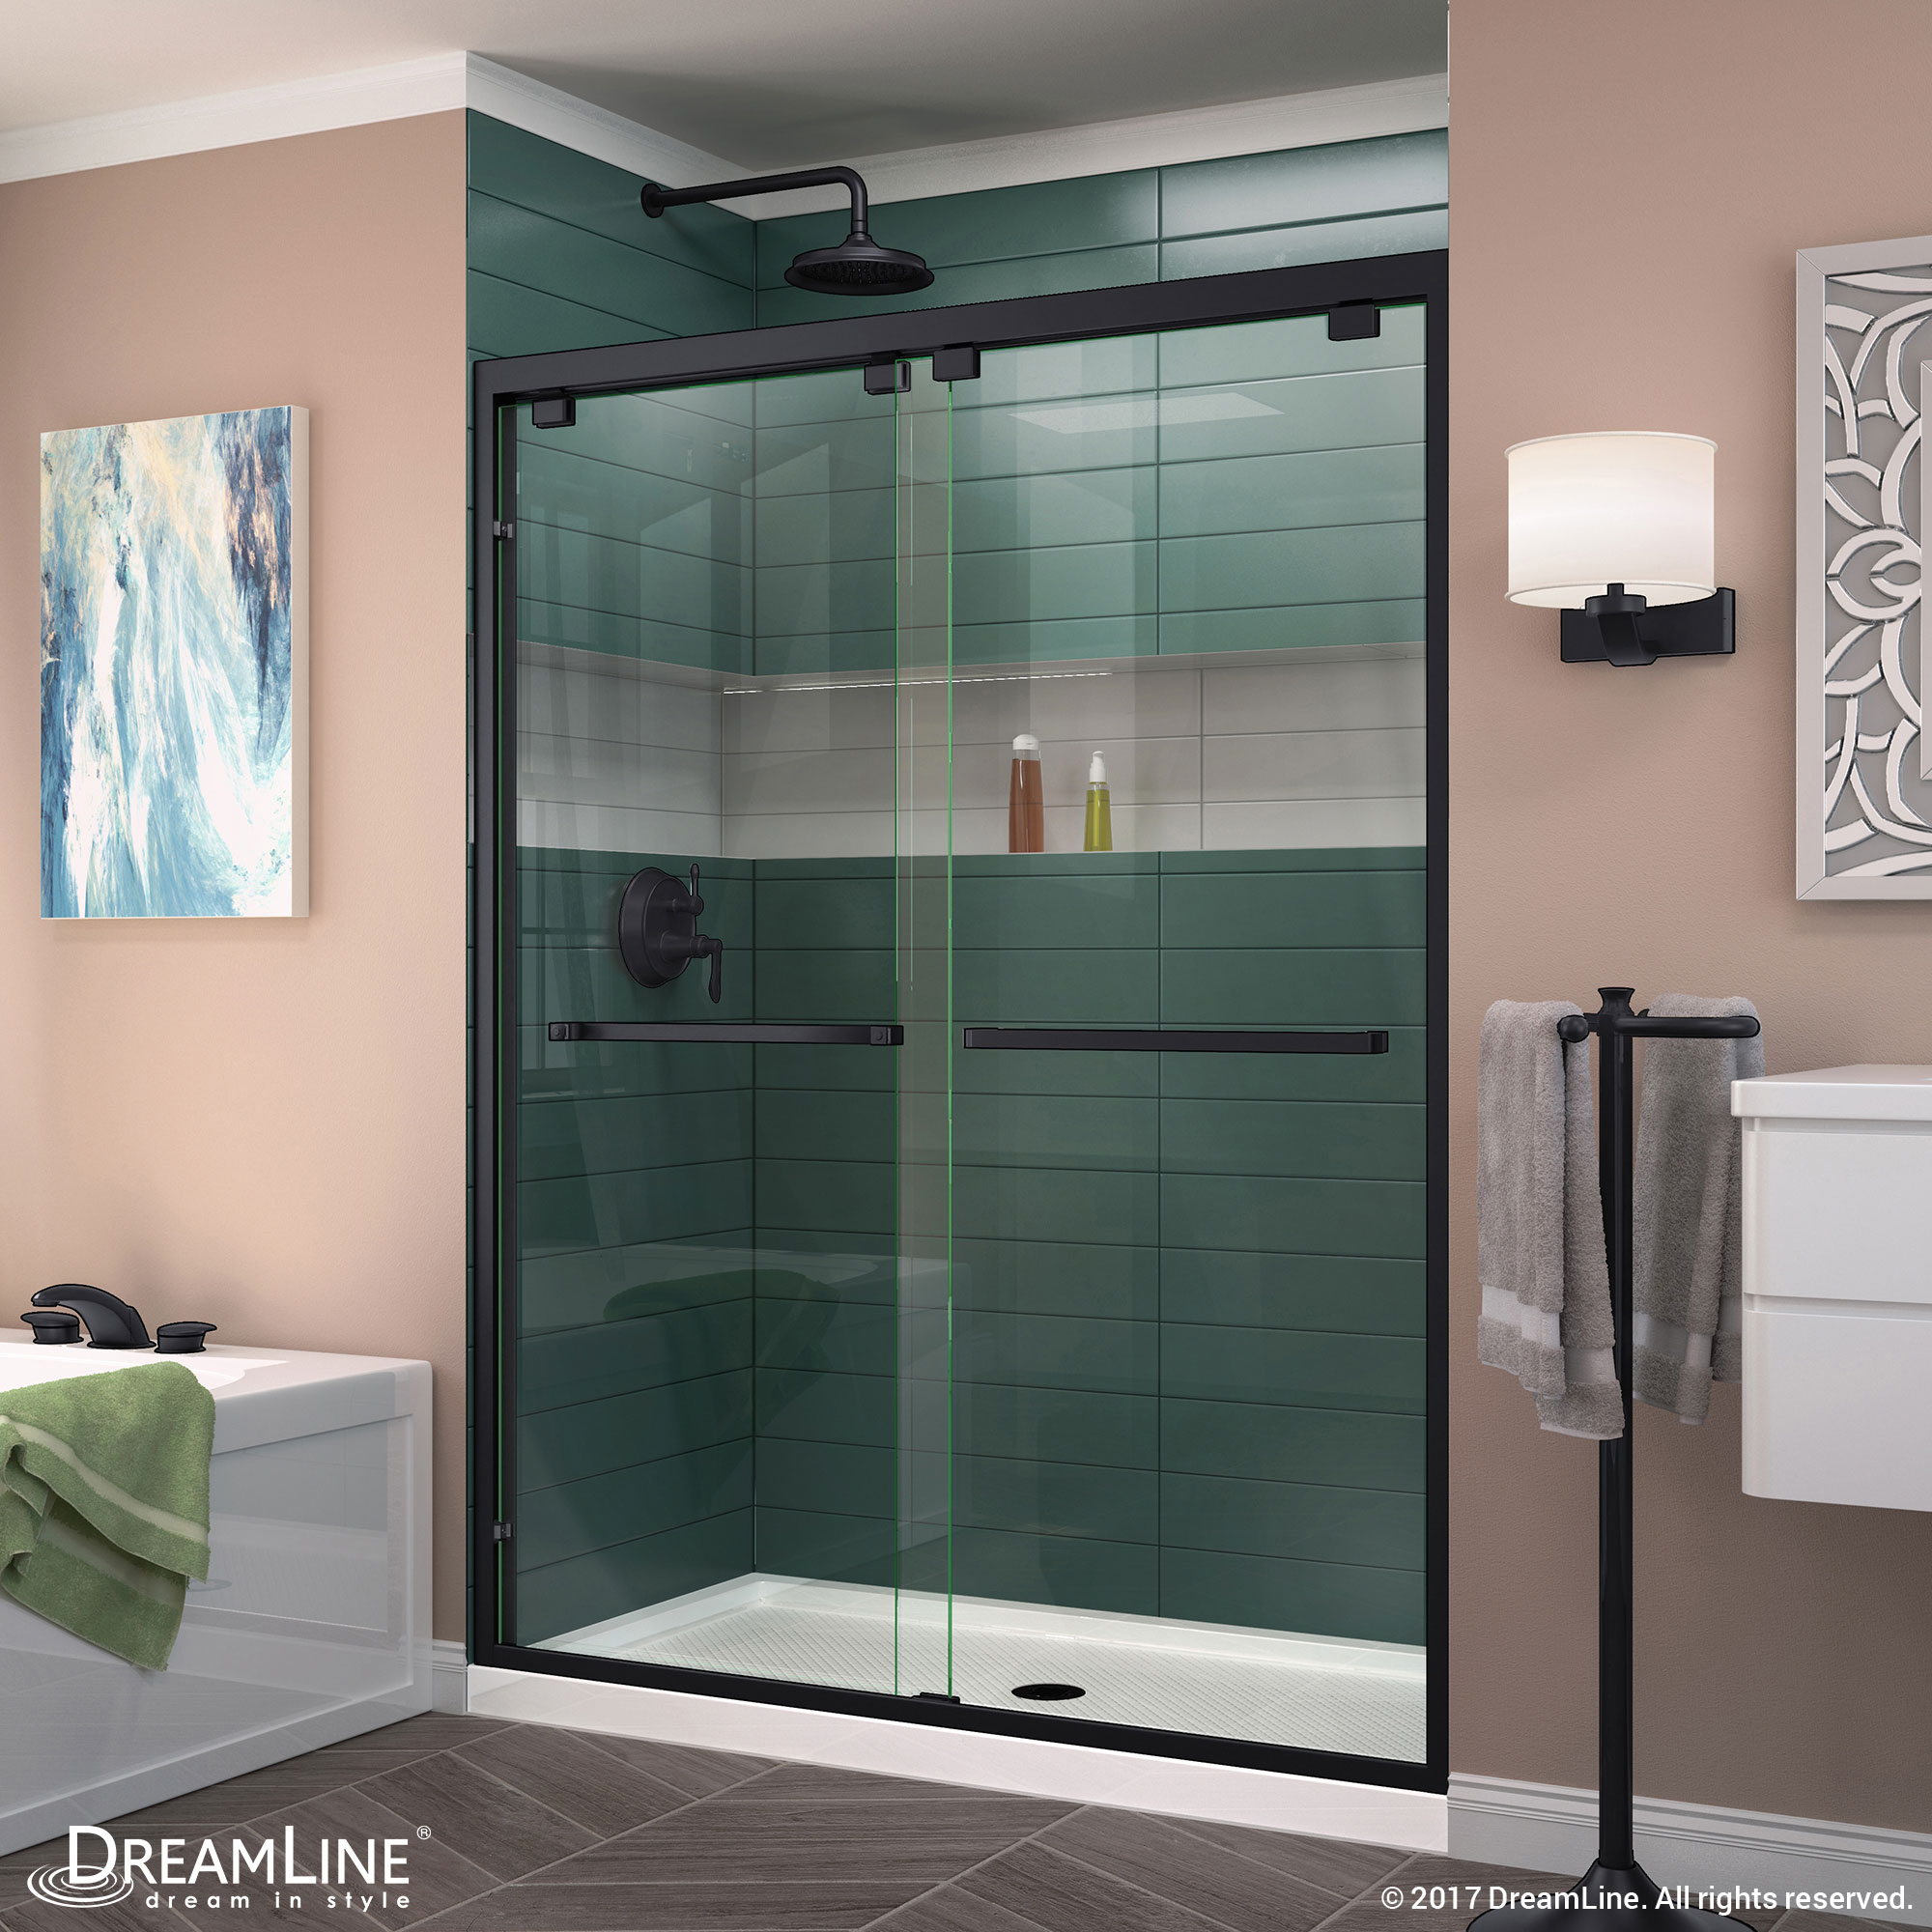 DreamLine Encore 32 in. D x 48 in. W x 78 3/4 in. H Bypass Shower Door in Oil Rubbed Bronze and Center Drain Biscuit Base Kit